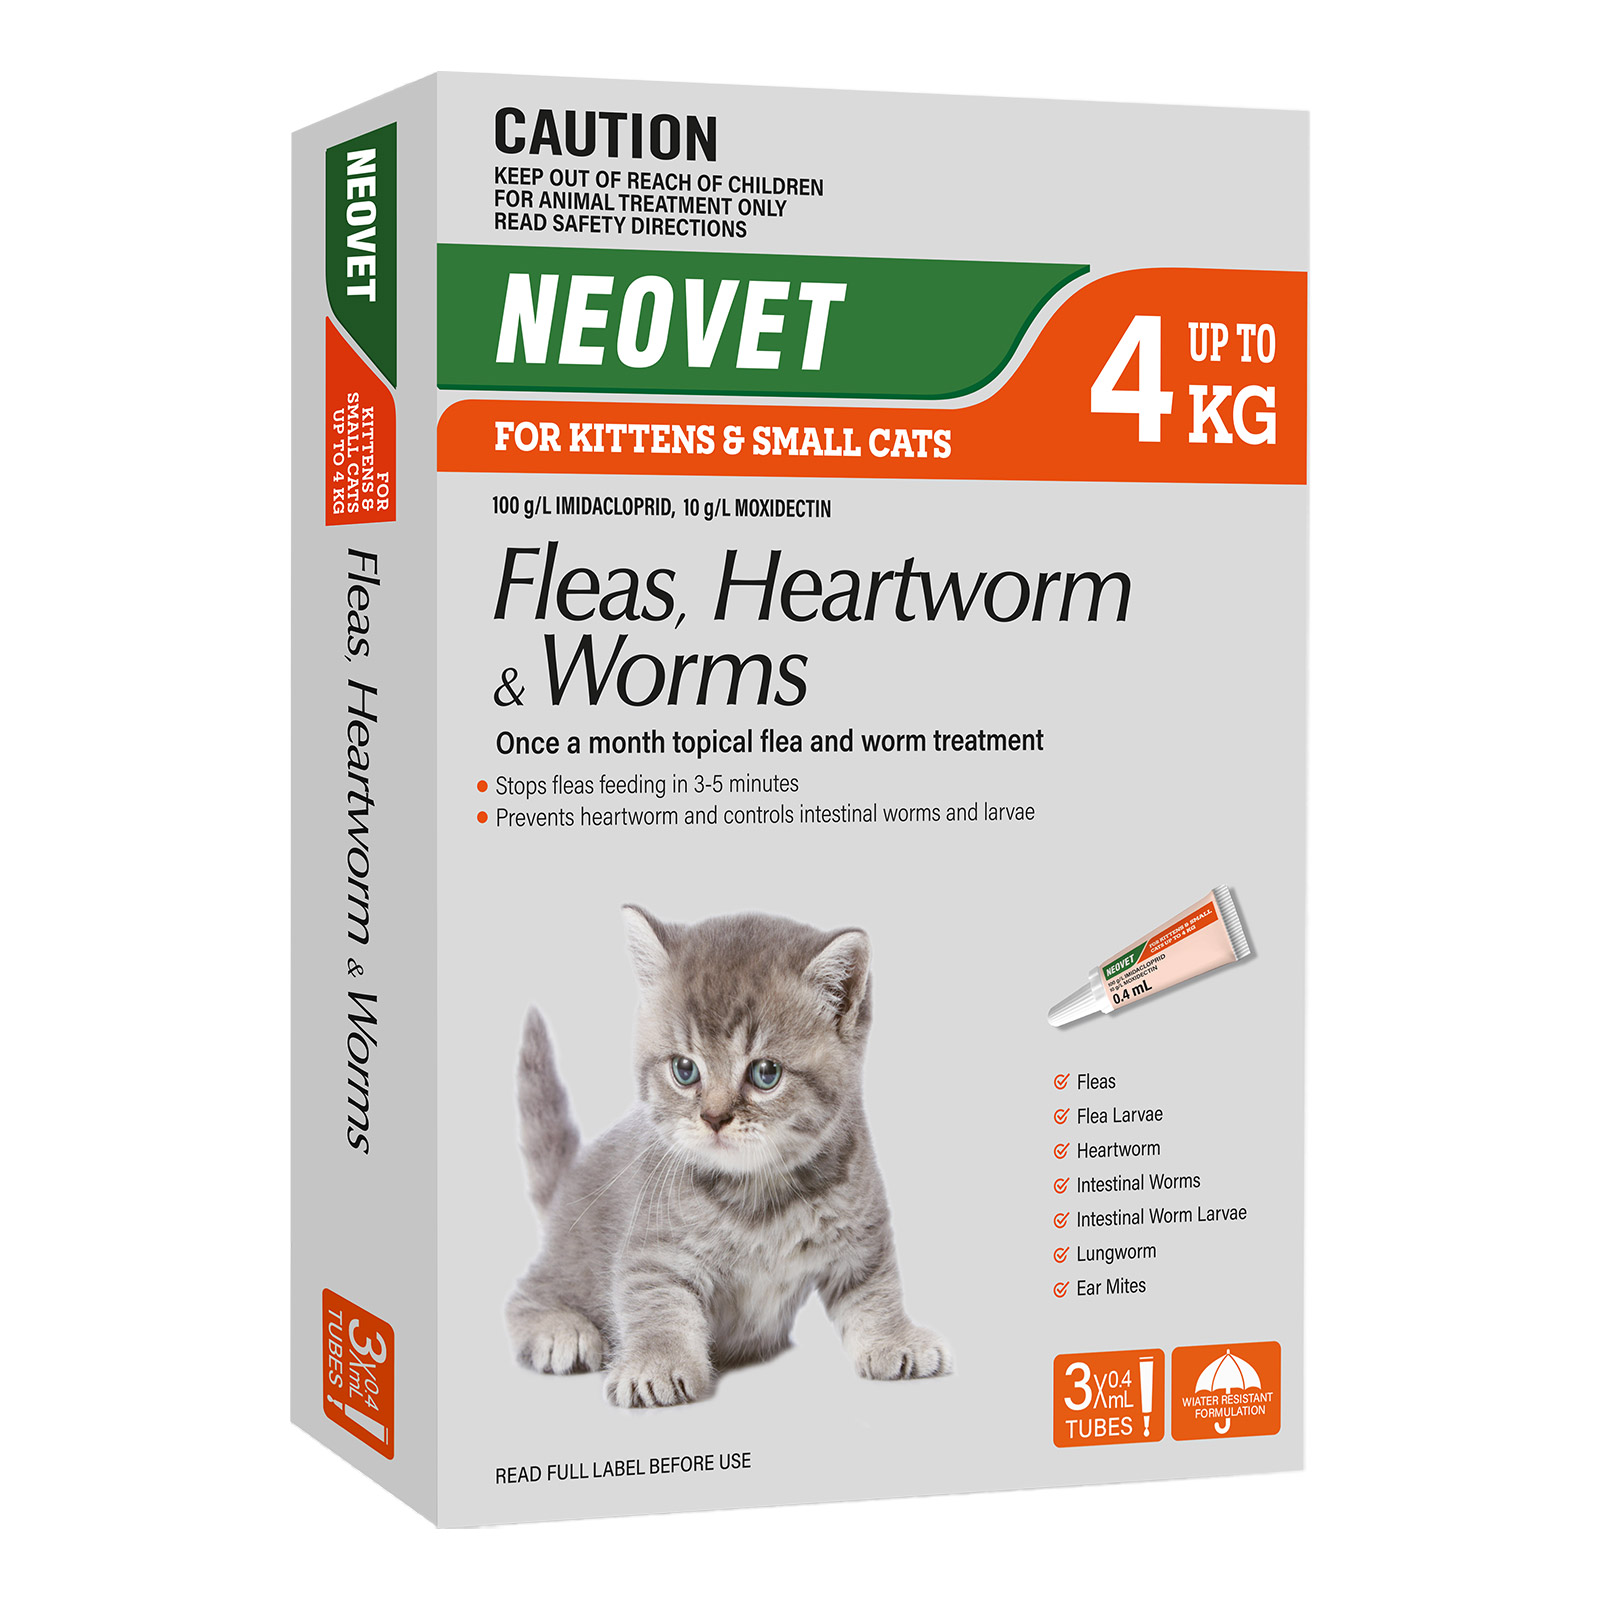 Neovet Spot-On For Kittens And Small Cats Upto 8.8lbs (Orange) 6 Pipettes
